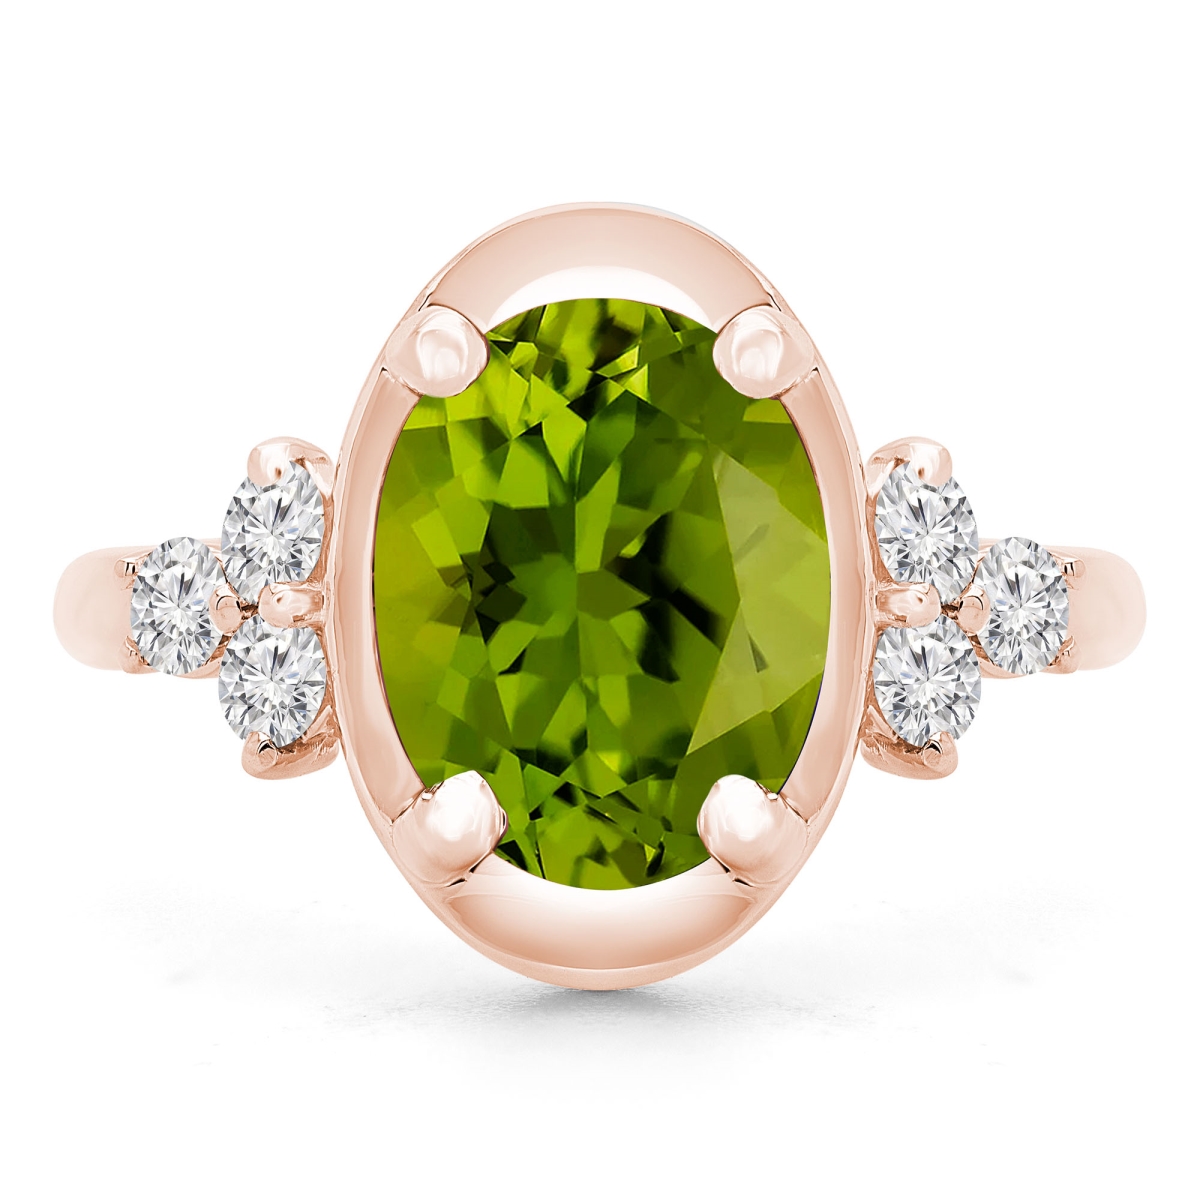 Picture of Majesty Diamonds MD190412-4.25 3.9 CTW Oval Green Peridot Cocktail Ring in 14K Rose Gold - Size 4.25